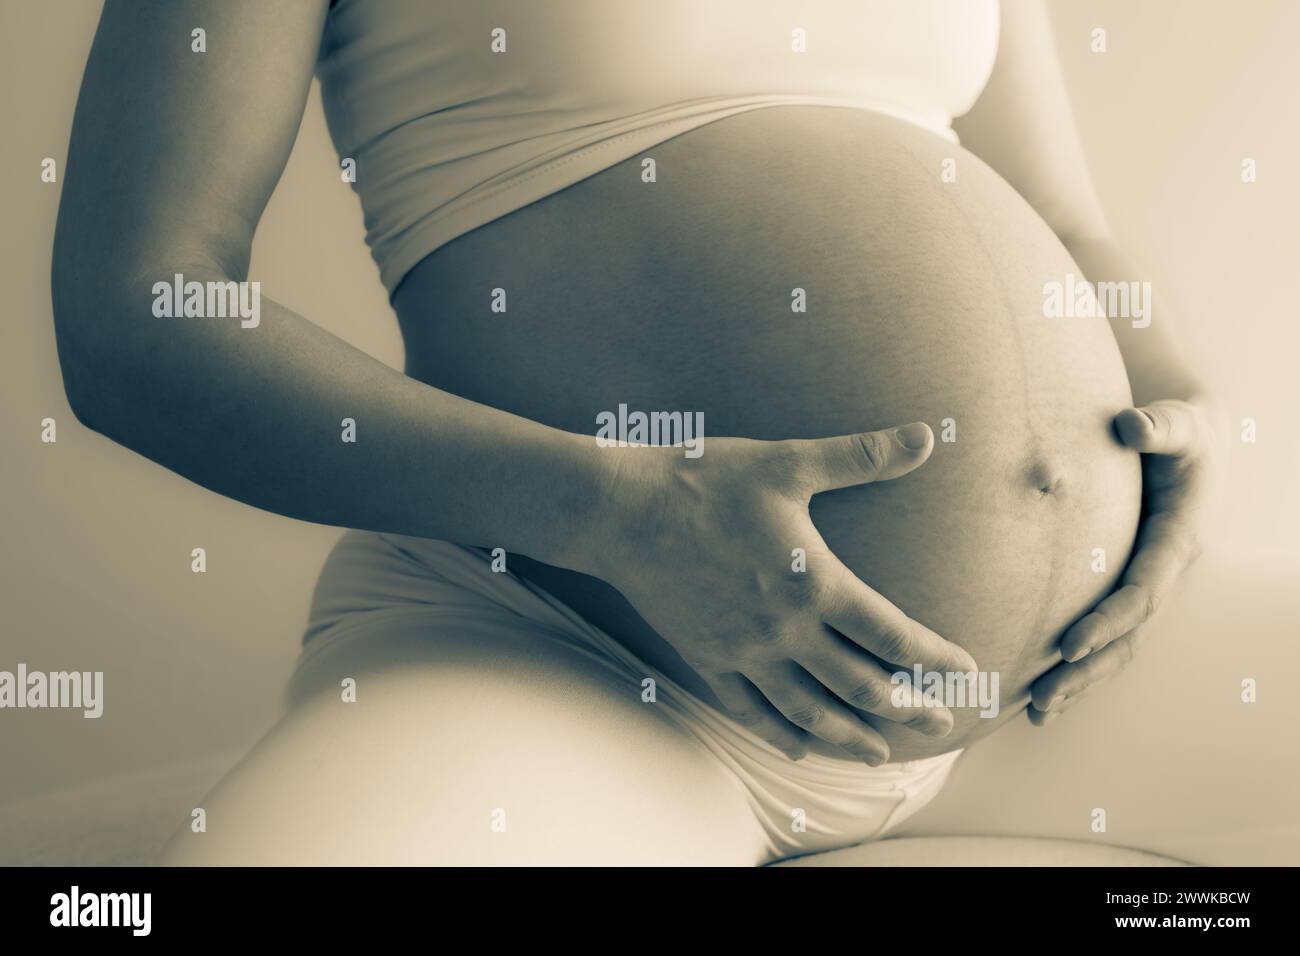 Description: Middle part of a mother sitting on a stool and gently holding her very round pregnant baby belly. Side angle view. White background. Brig Stock Photo